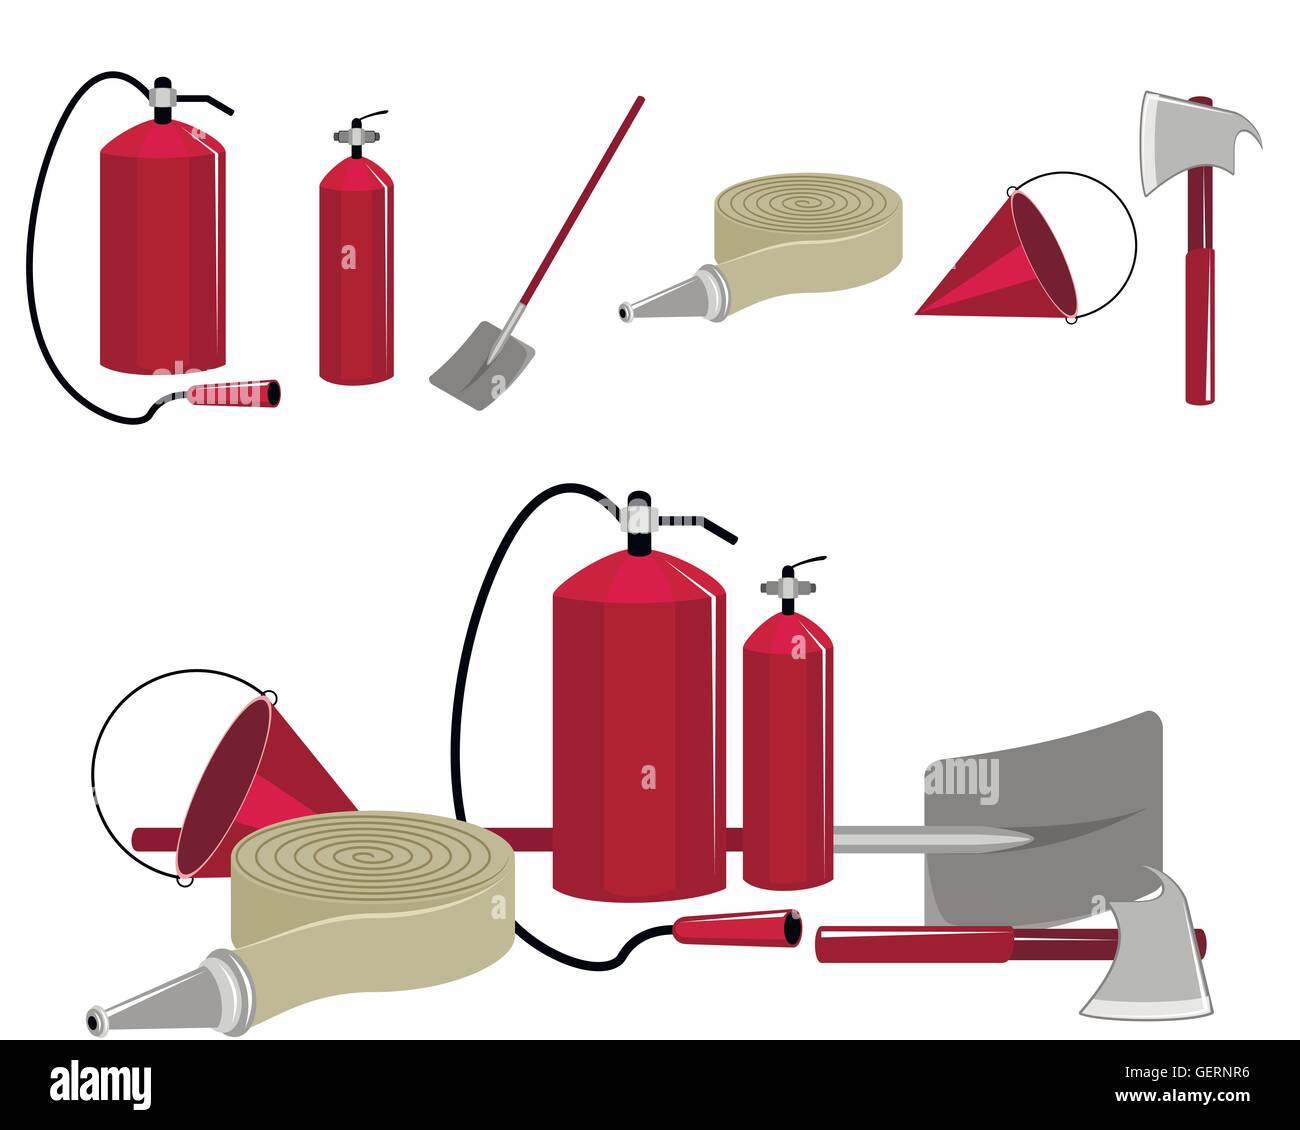 Vector illustration of a set of fire-fighting equipment Stock Vector